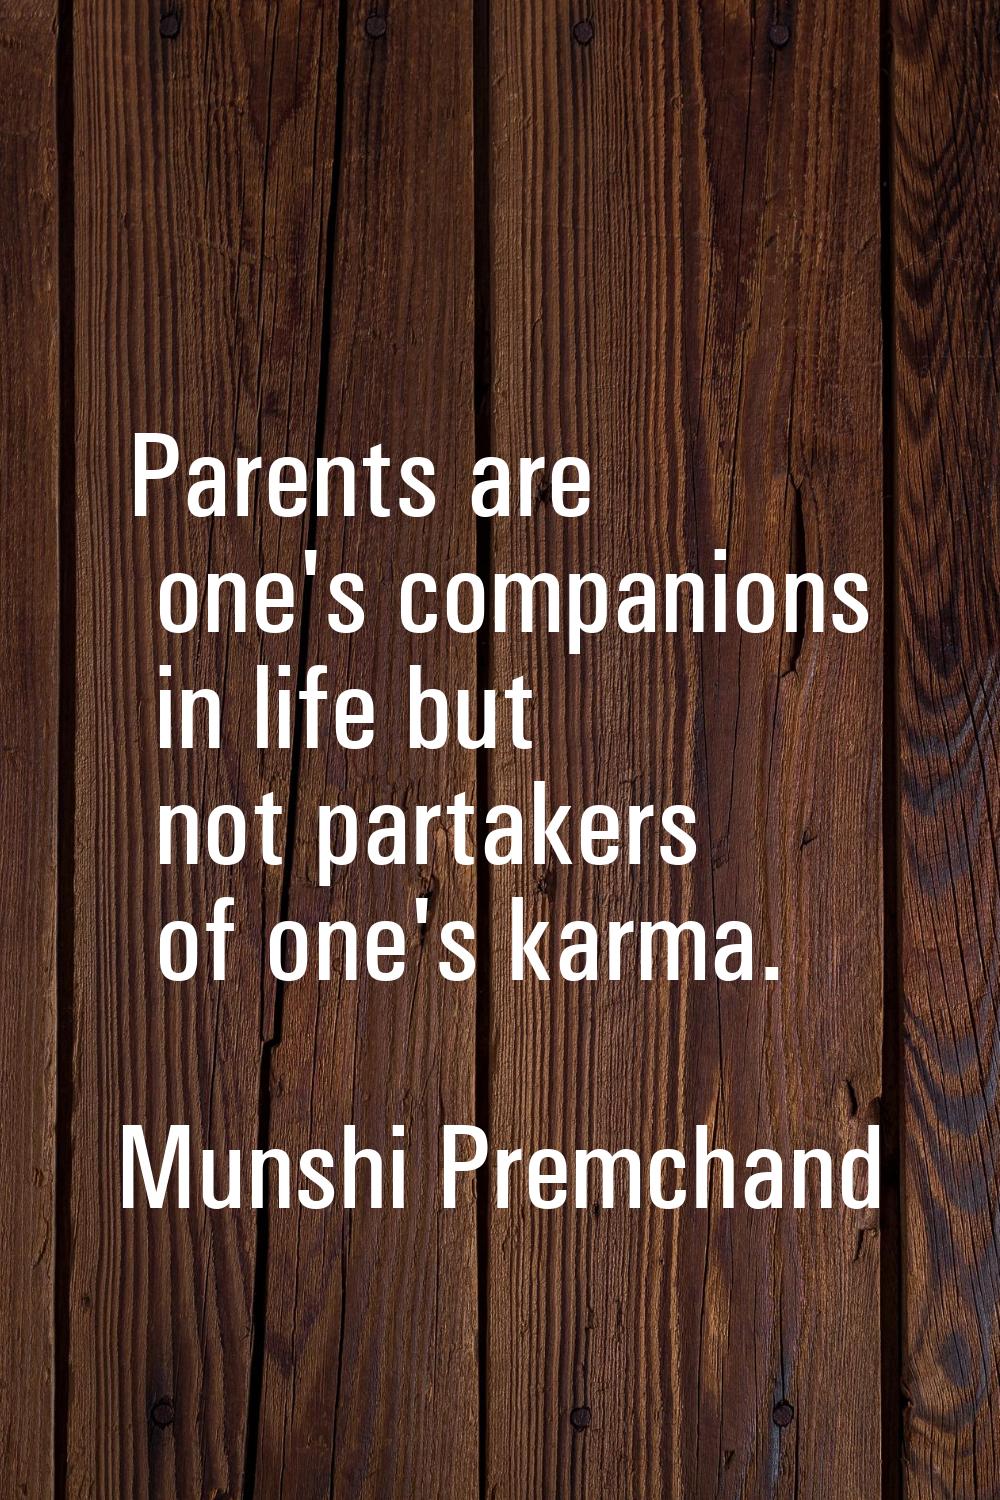 Parents are one's companions in life but not partakers of one's karma.